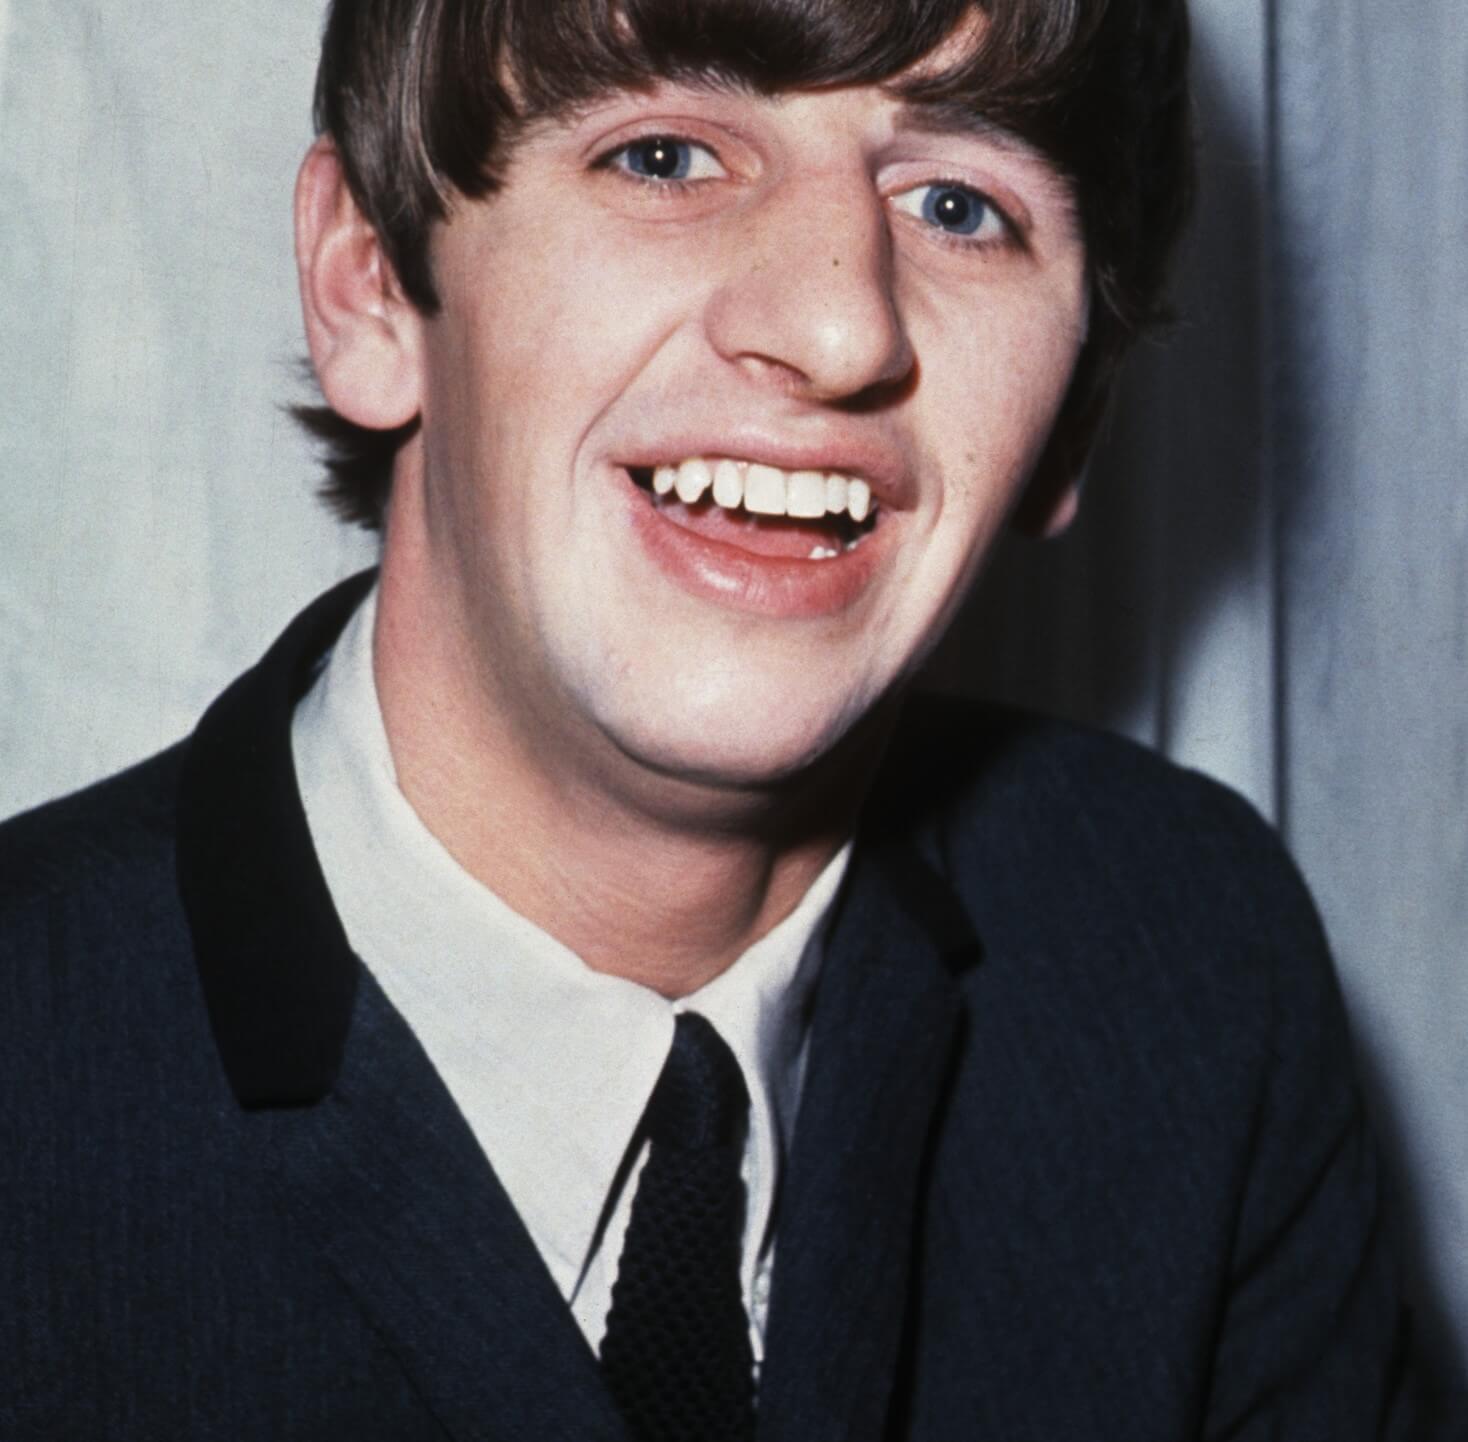 Ringo Starr in a suit